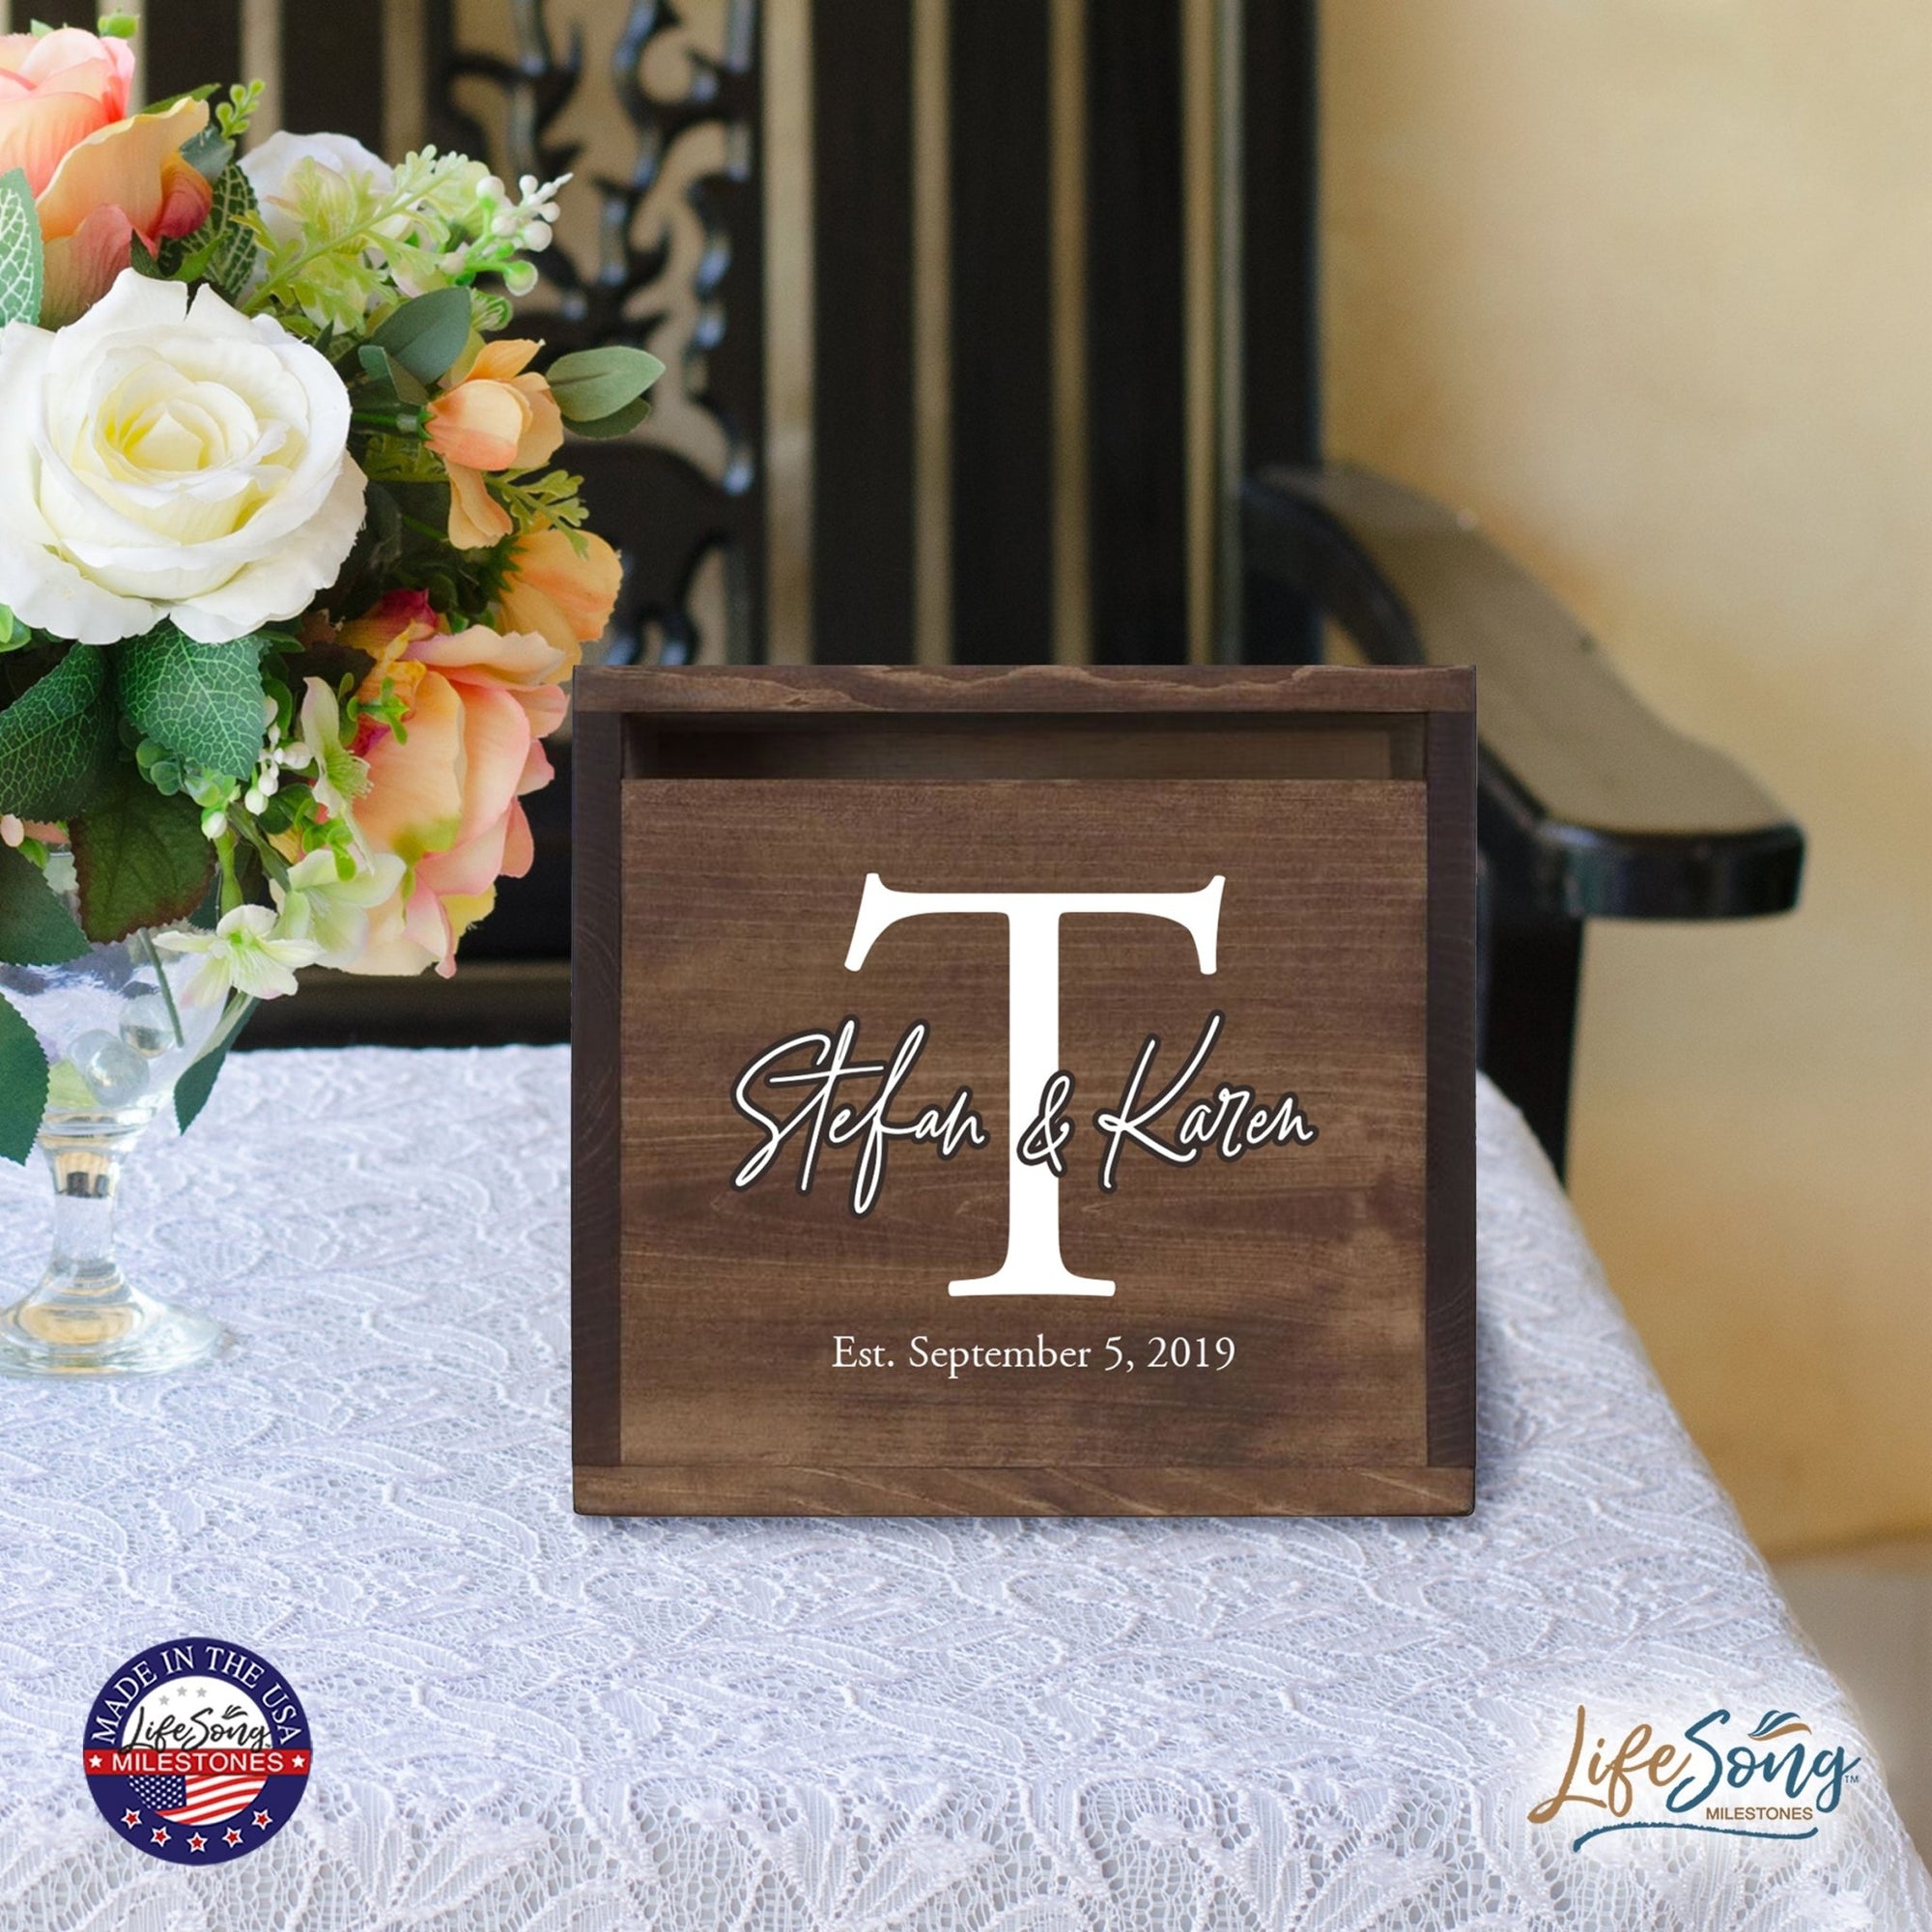 Personalized Wooden Card Box for Wedding Ceremonies, Venues, Receptions, Bridal Showers, and Engagement Parties 13.5x12 - Stefan & Karen (T) - LifeSong Milestones